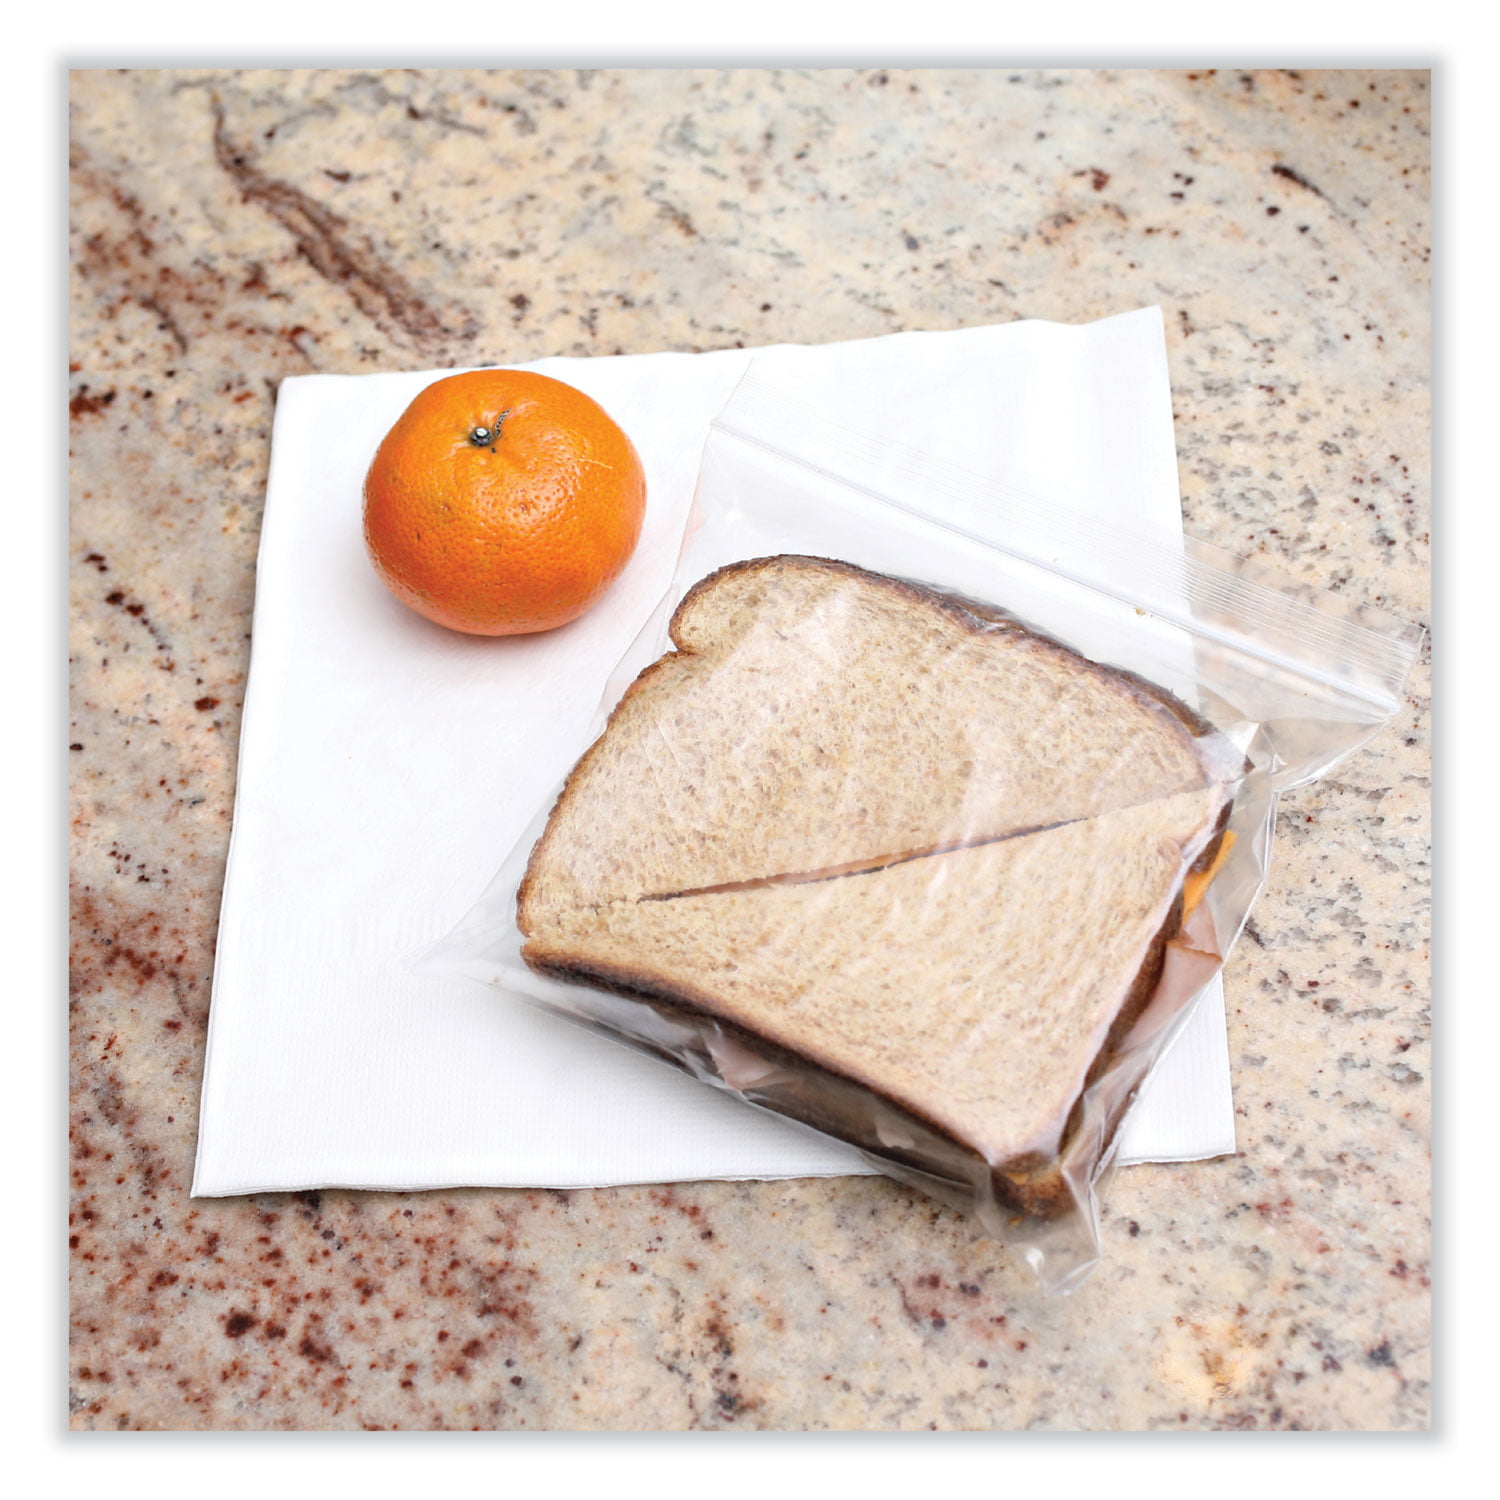 Ziploc Resealable Sandwich Bags Clear Box of 500